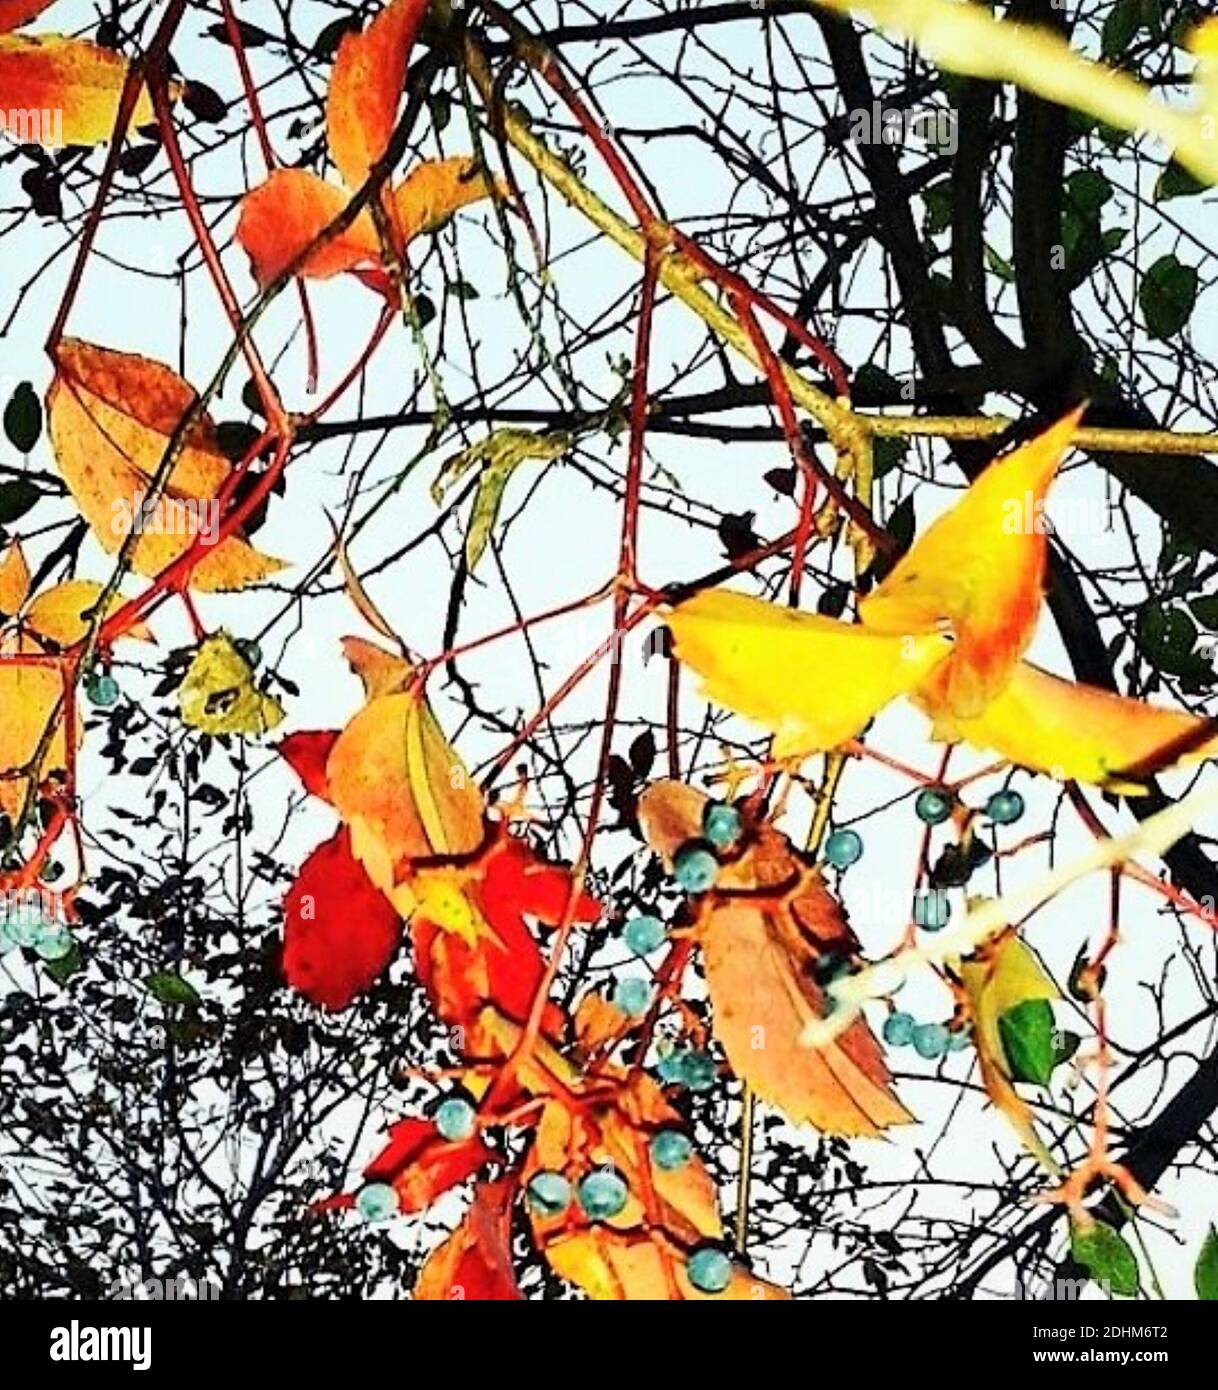 Colourful ivy leaves. Autumn leaves in yellow, orange and red colours. Ivy branches in fall. Stock Photo